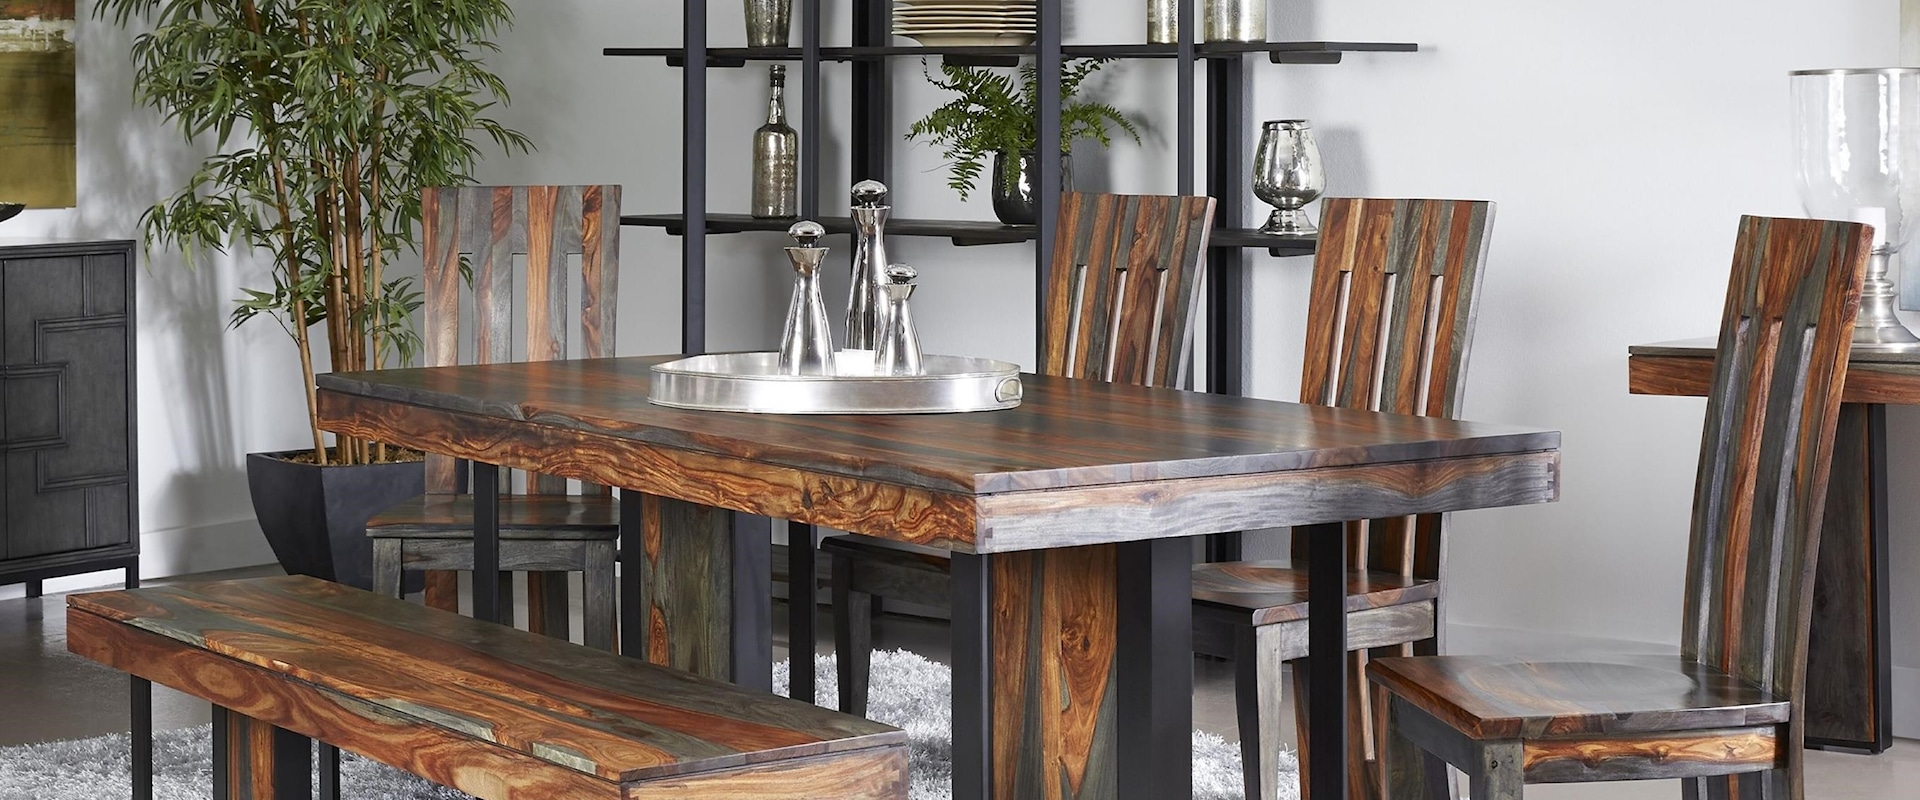 Rustic Table and Chair Set with Bench